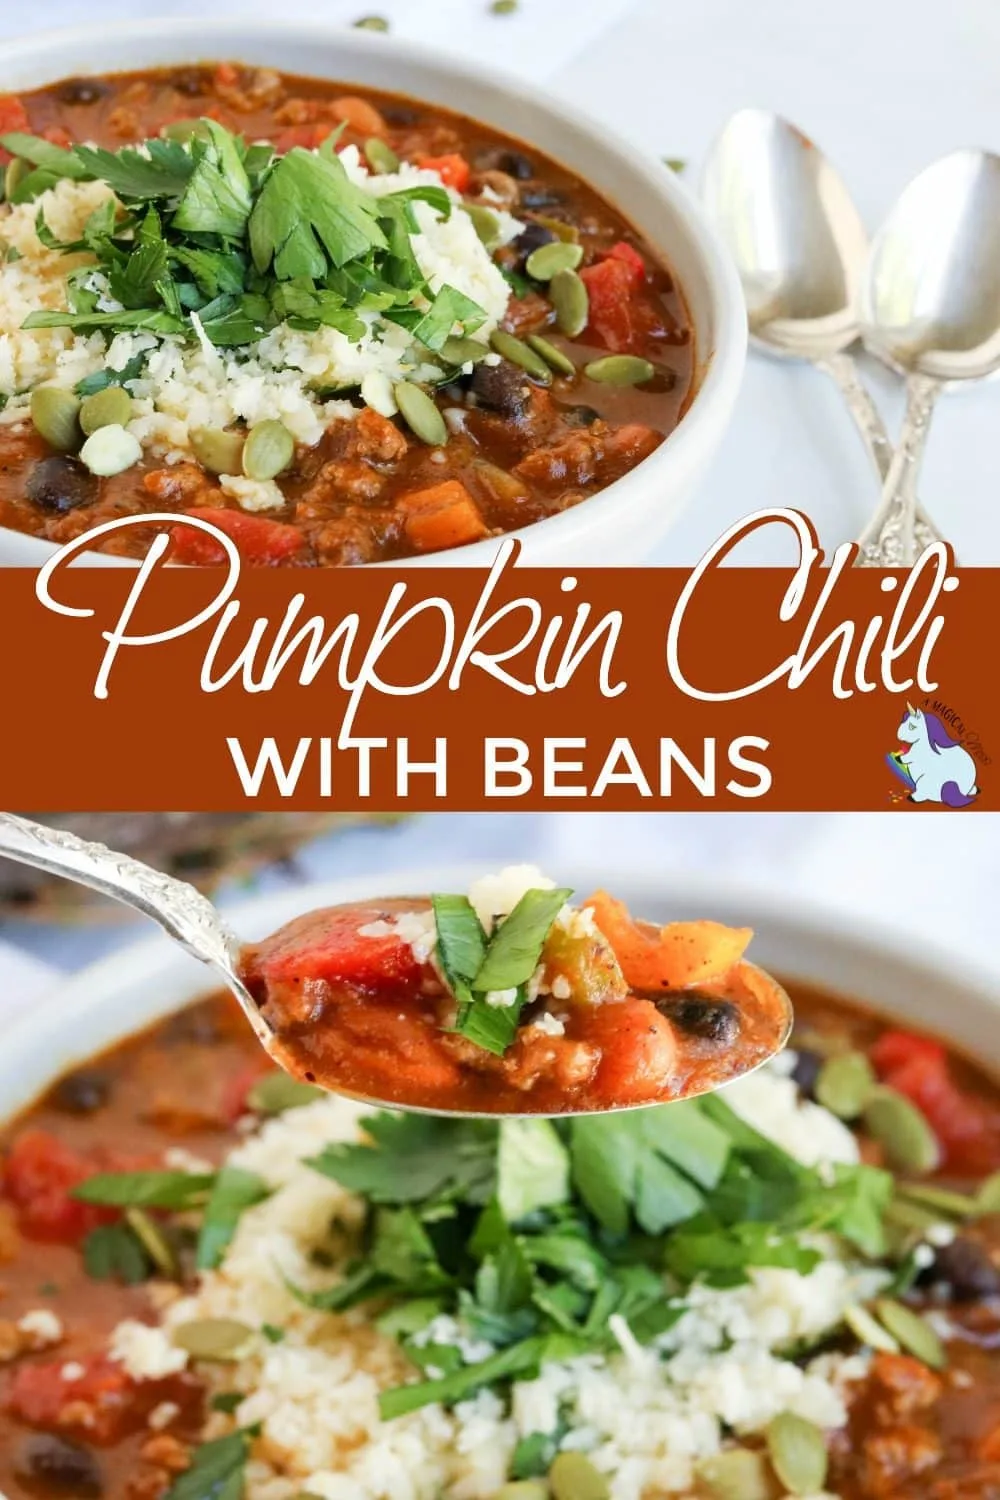 Pumpkin chili recipe in a bowl and a spoonful of it up close.